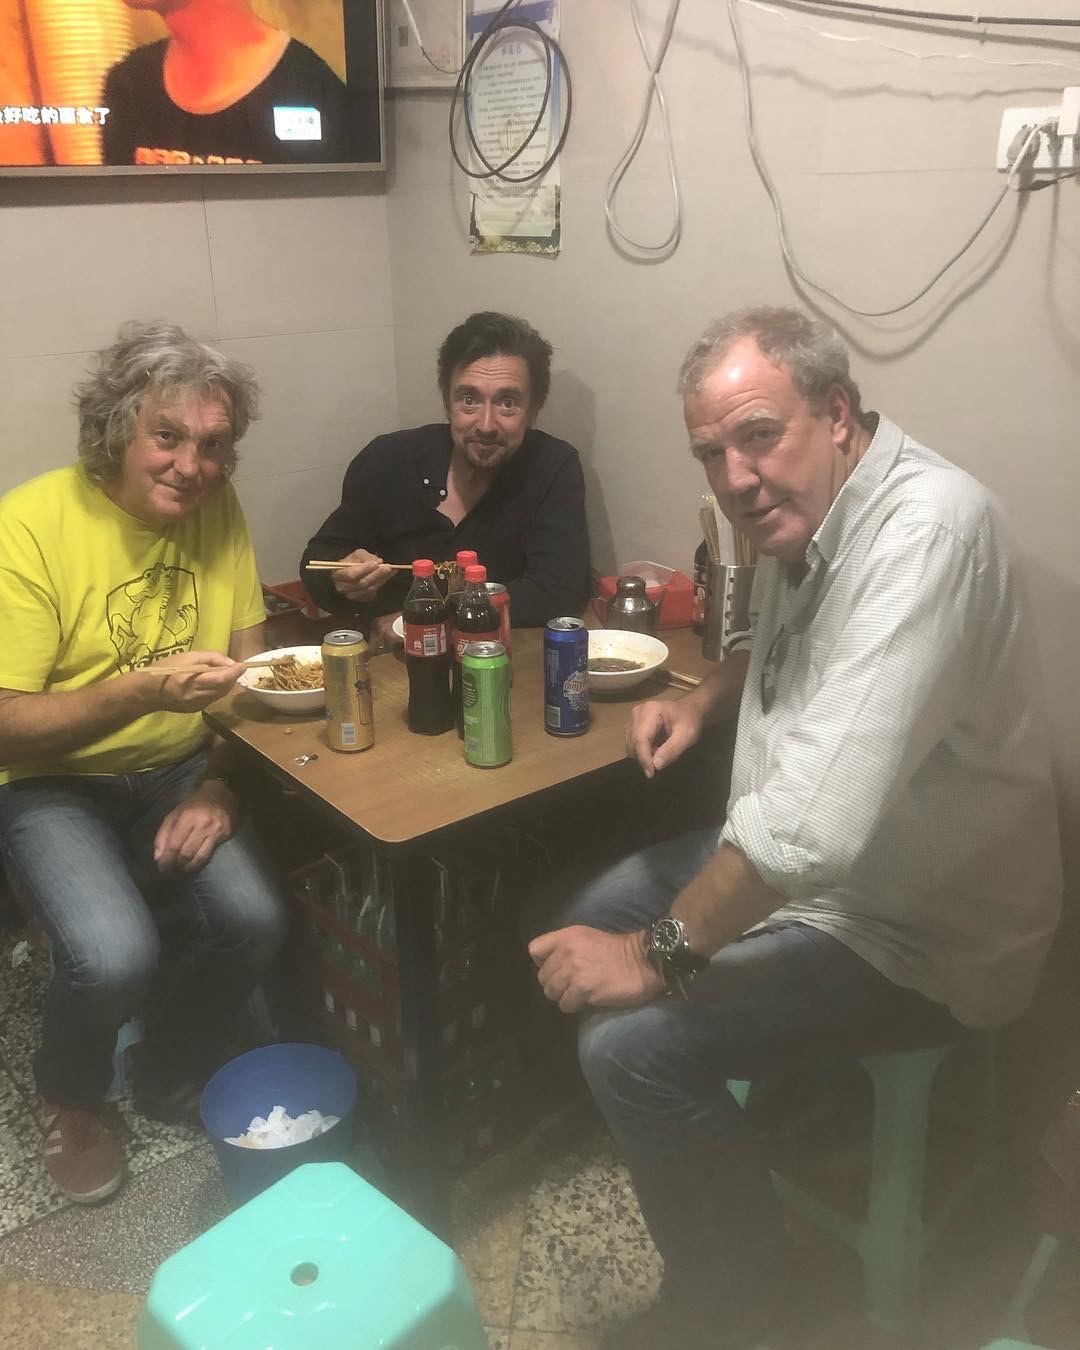 The men are sitting... - The grand tour, Beer, Food, Top Gear, For three persons